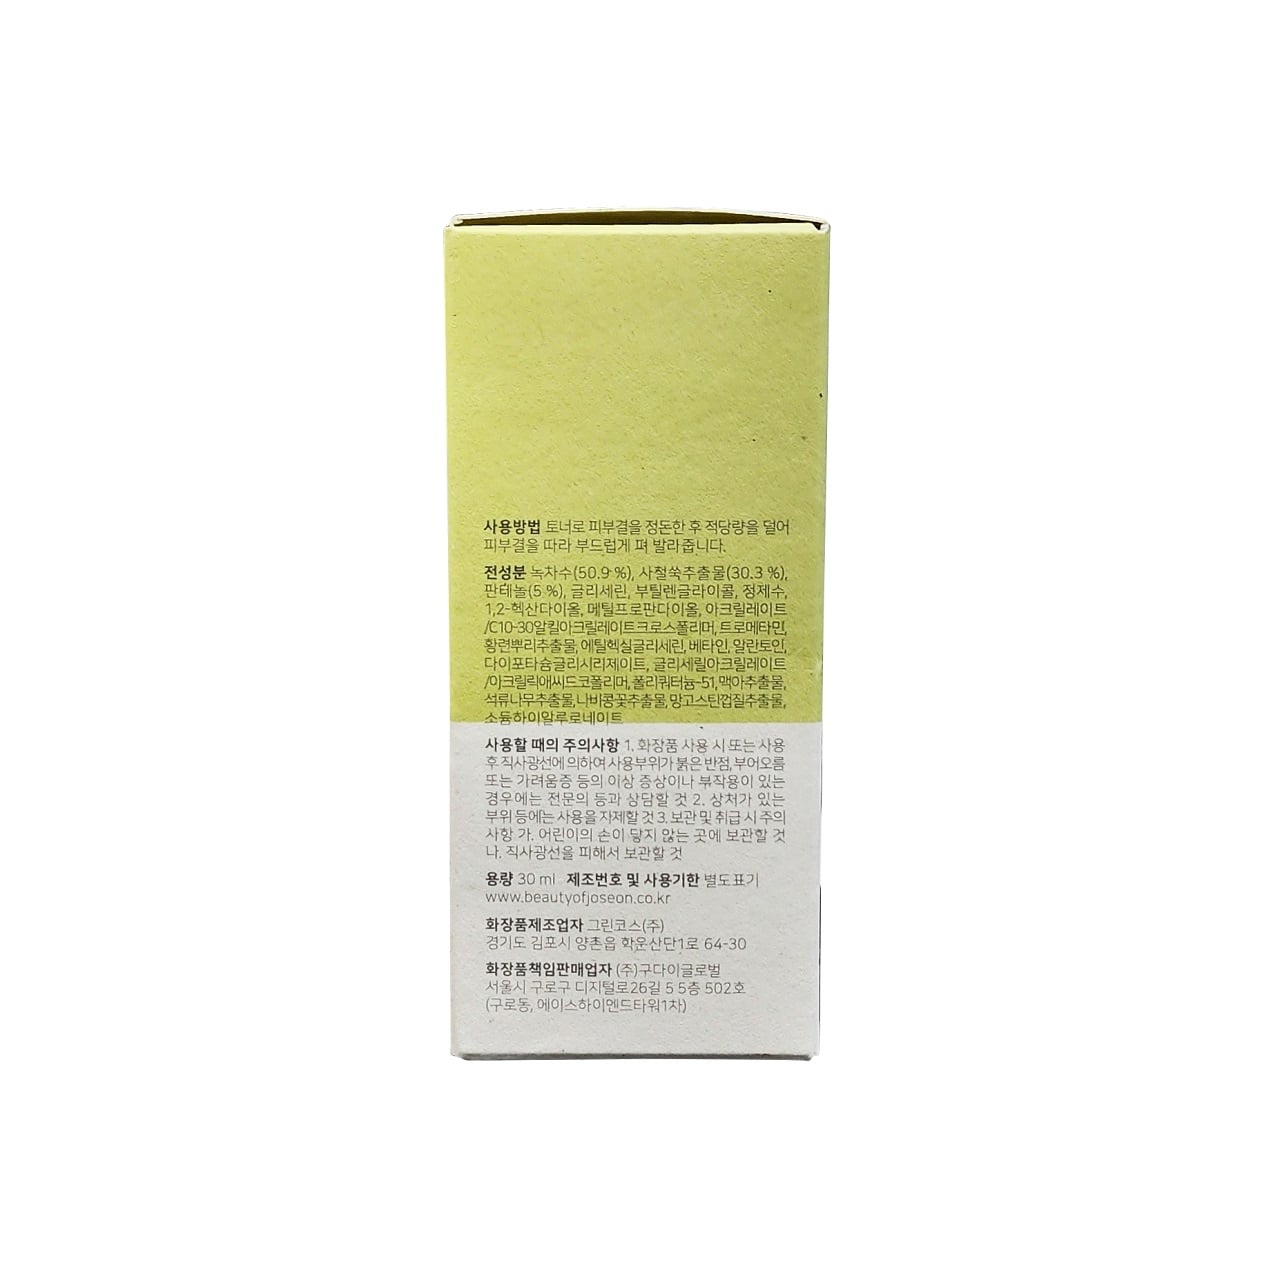 Directions, ingredients, cautions for Beauty of Joseon Calming Serum Green Tea + Panthenol (30 mL) in French